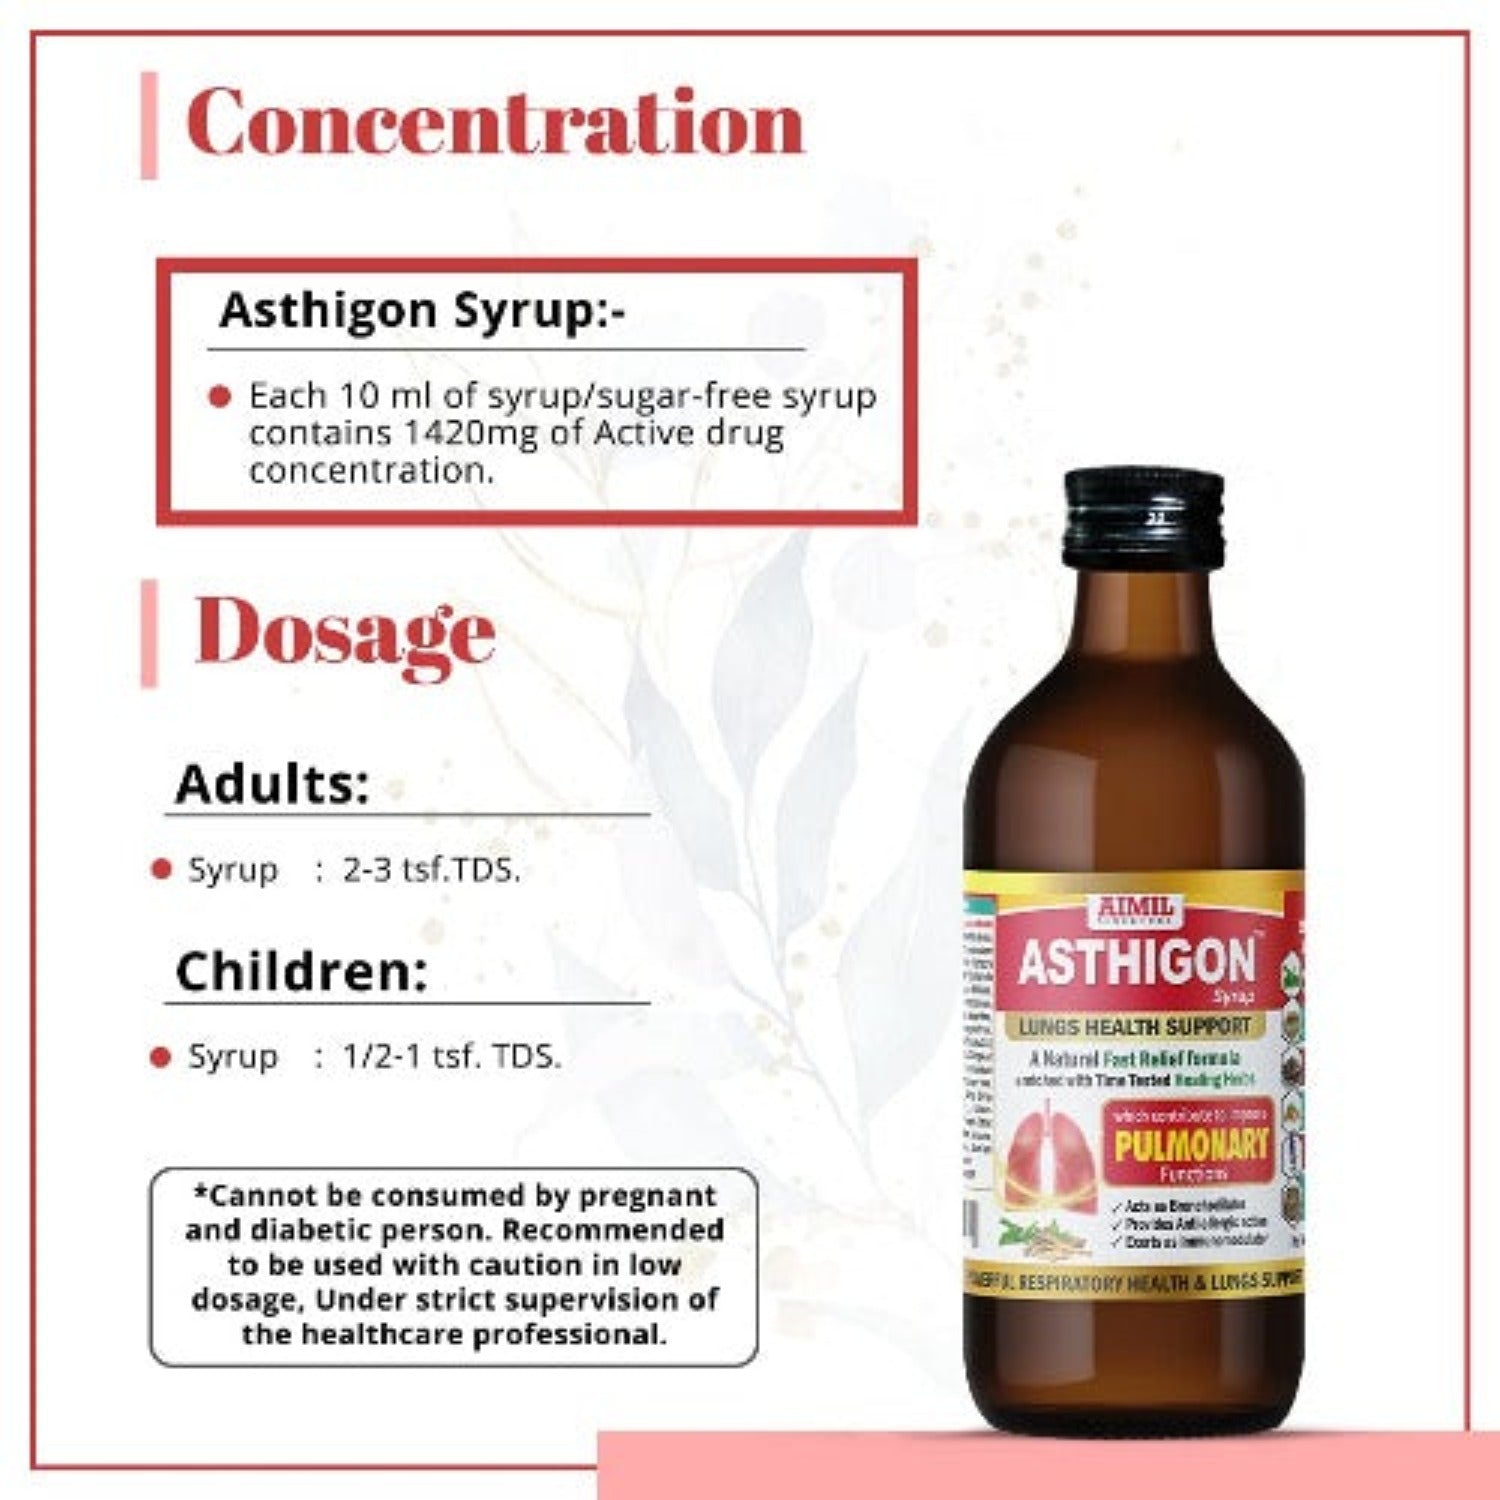 Aimil Ayurvedic Asthigon Syrup Lungs Health Support Immunomodulator Whole Body Syrup